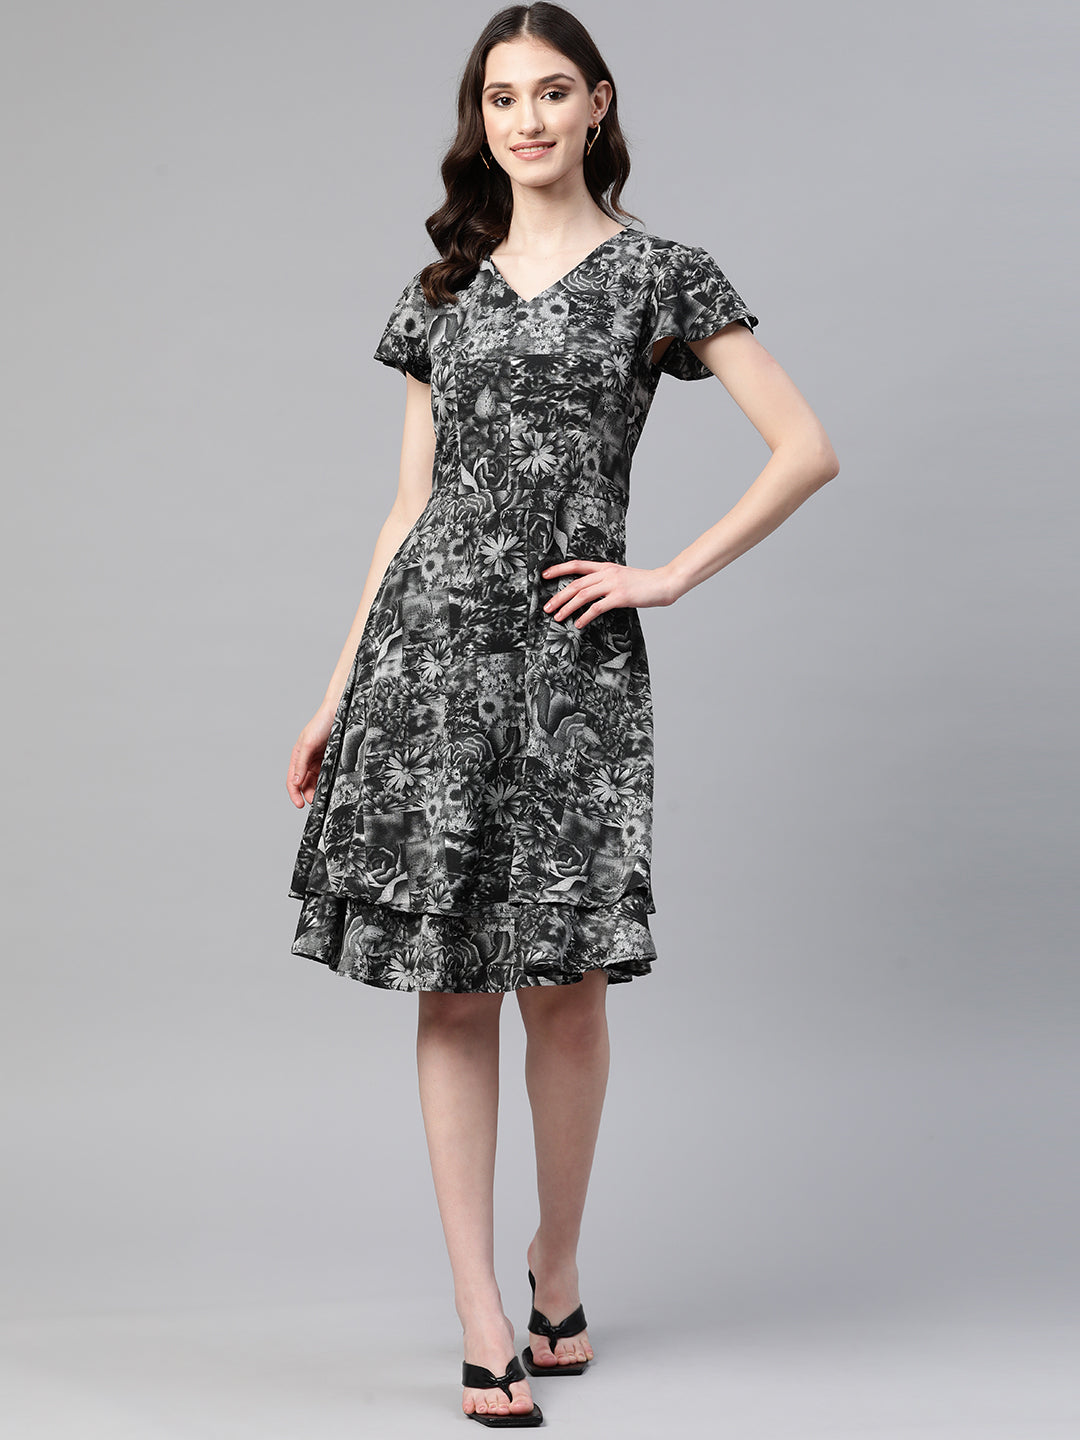 Cottinfab Floral Print Flared Sleeves Layered Crepe A-Line Dress